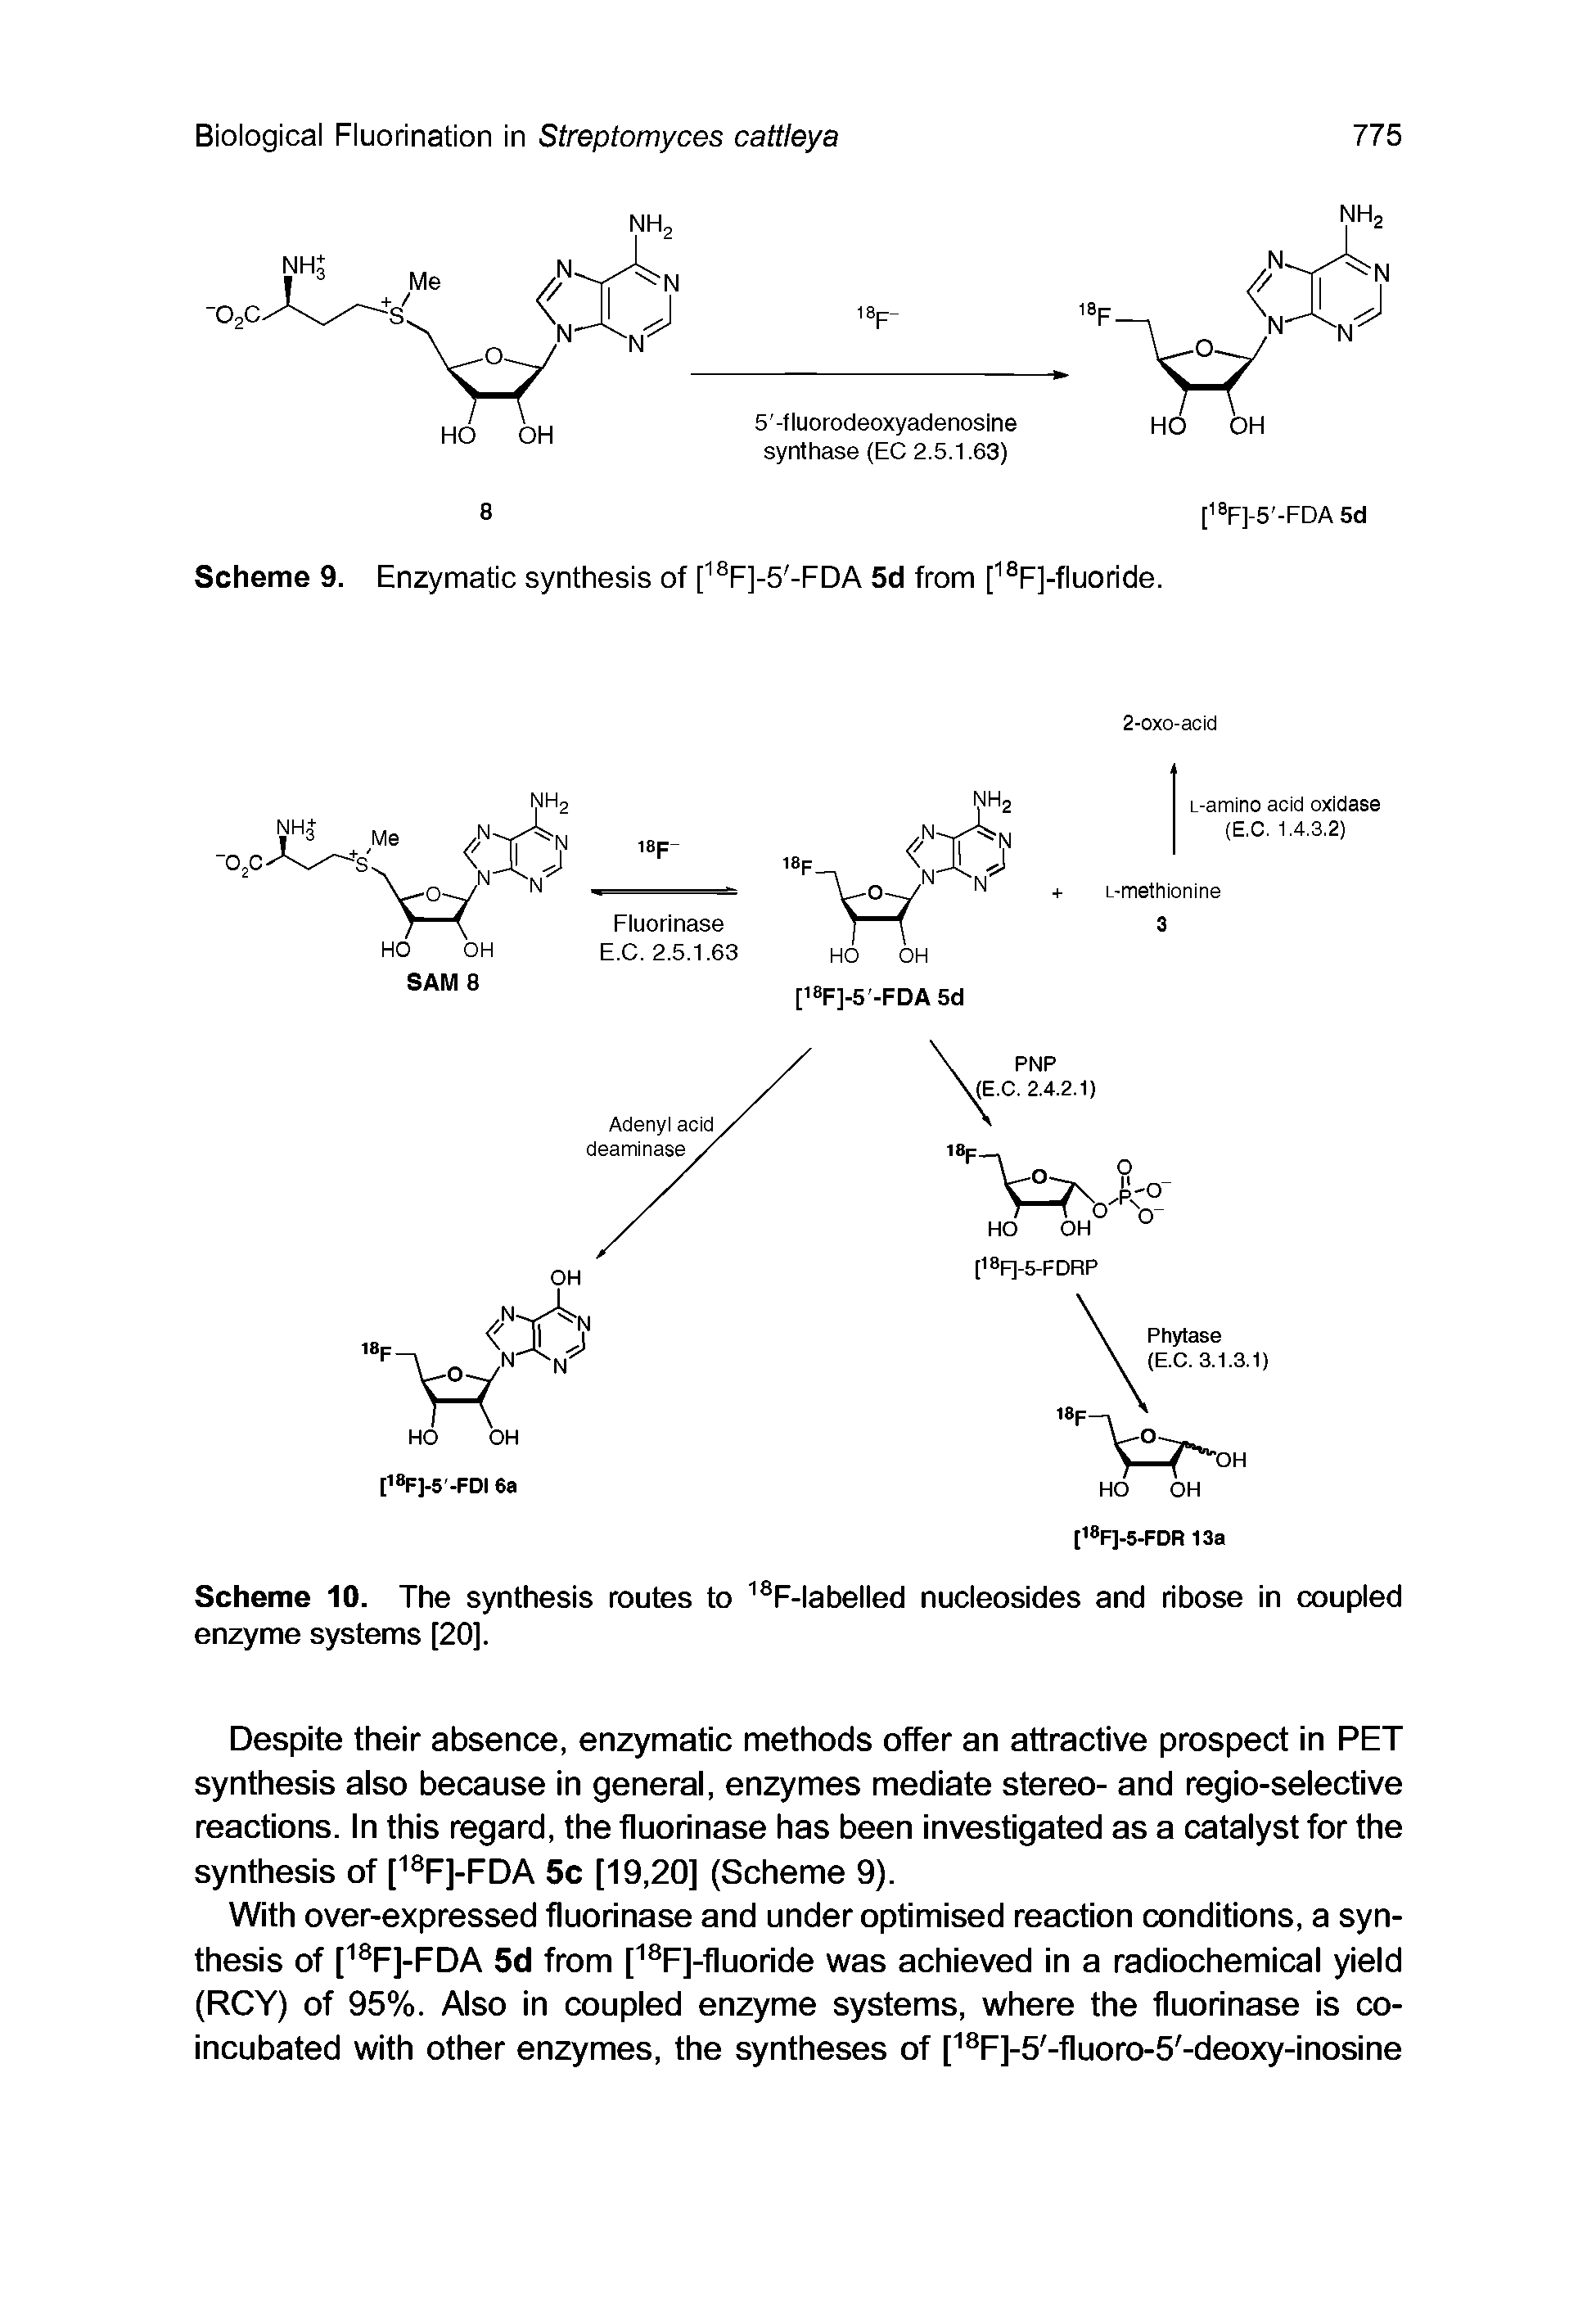 Scheme 10. The synthesis routes to F-labelled nucleosides and ribose in coupled enzyme systems [20].